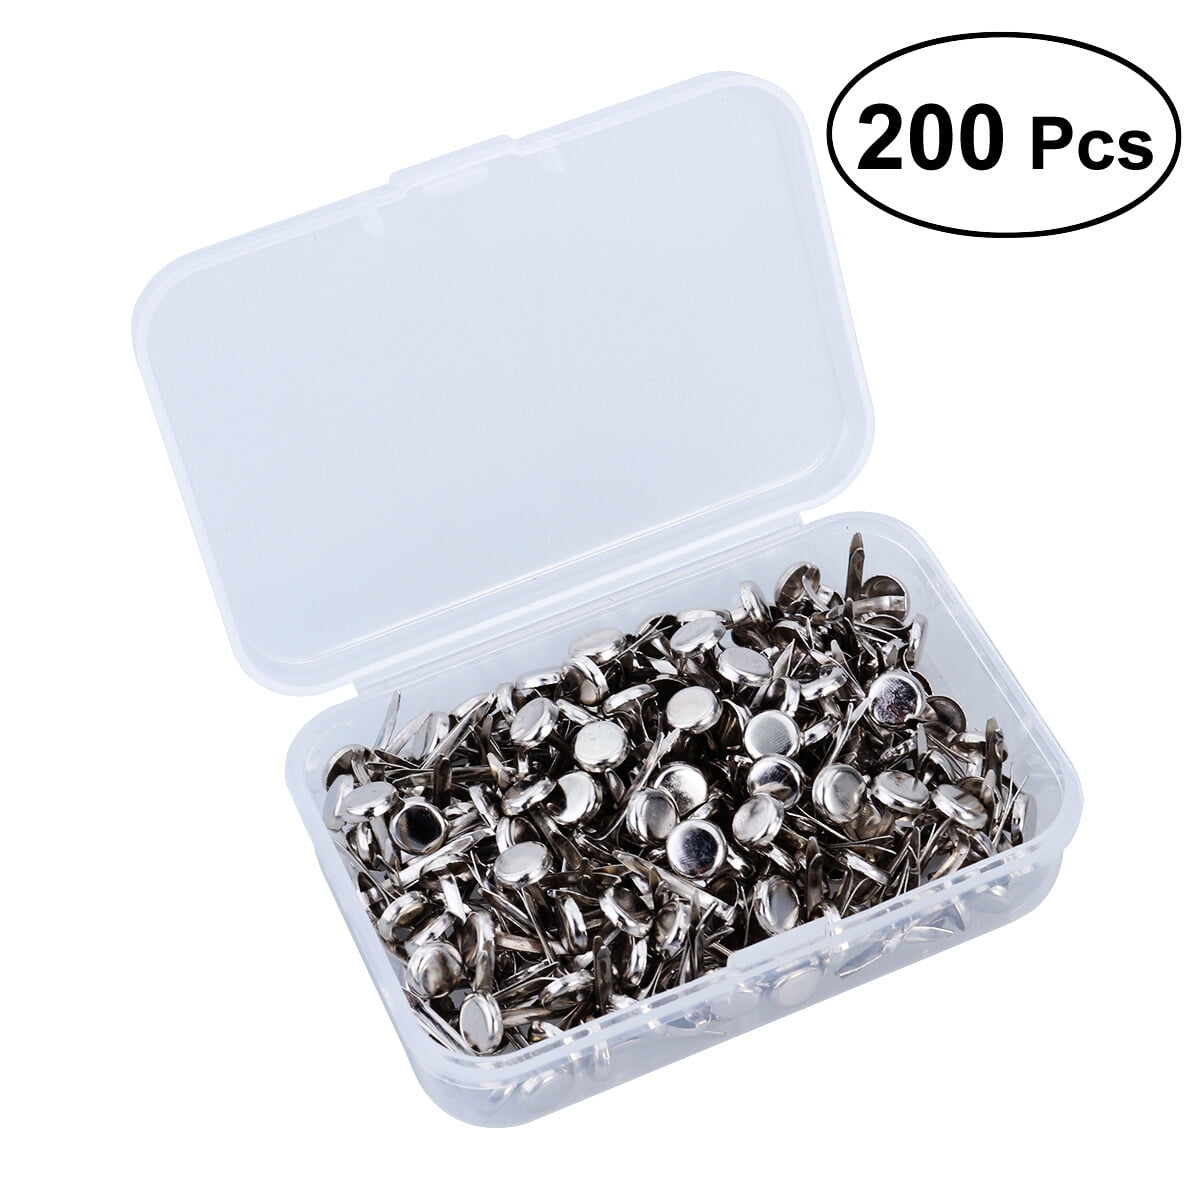 20 Pcs Metal Brad Fasteners with Pull Ring Large Paper Fasteners for DIY  Art Crafting Project for Drawer Scoreboard Kitchen Room